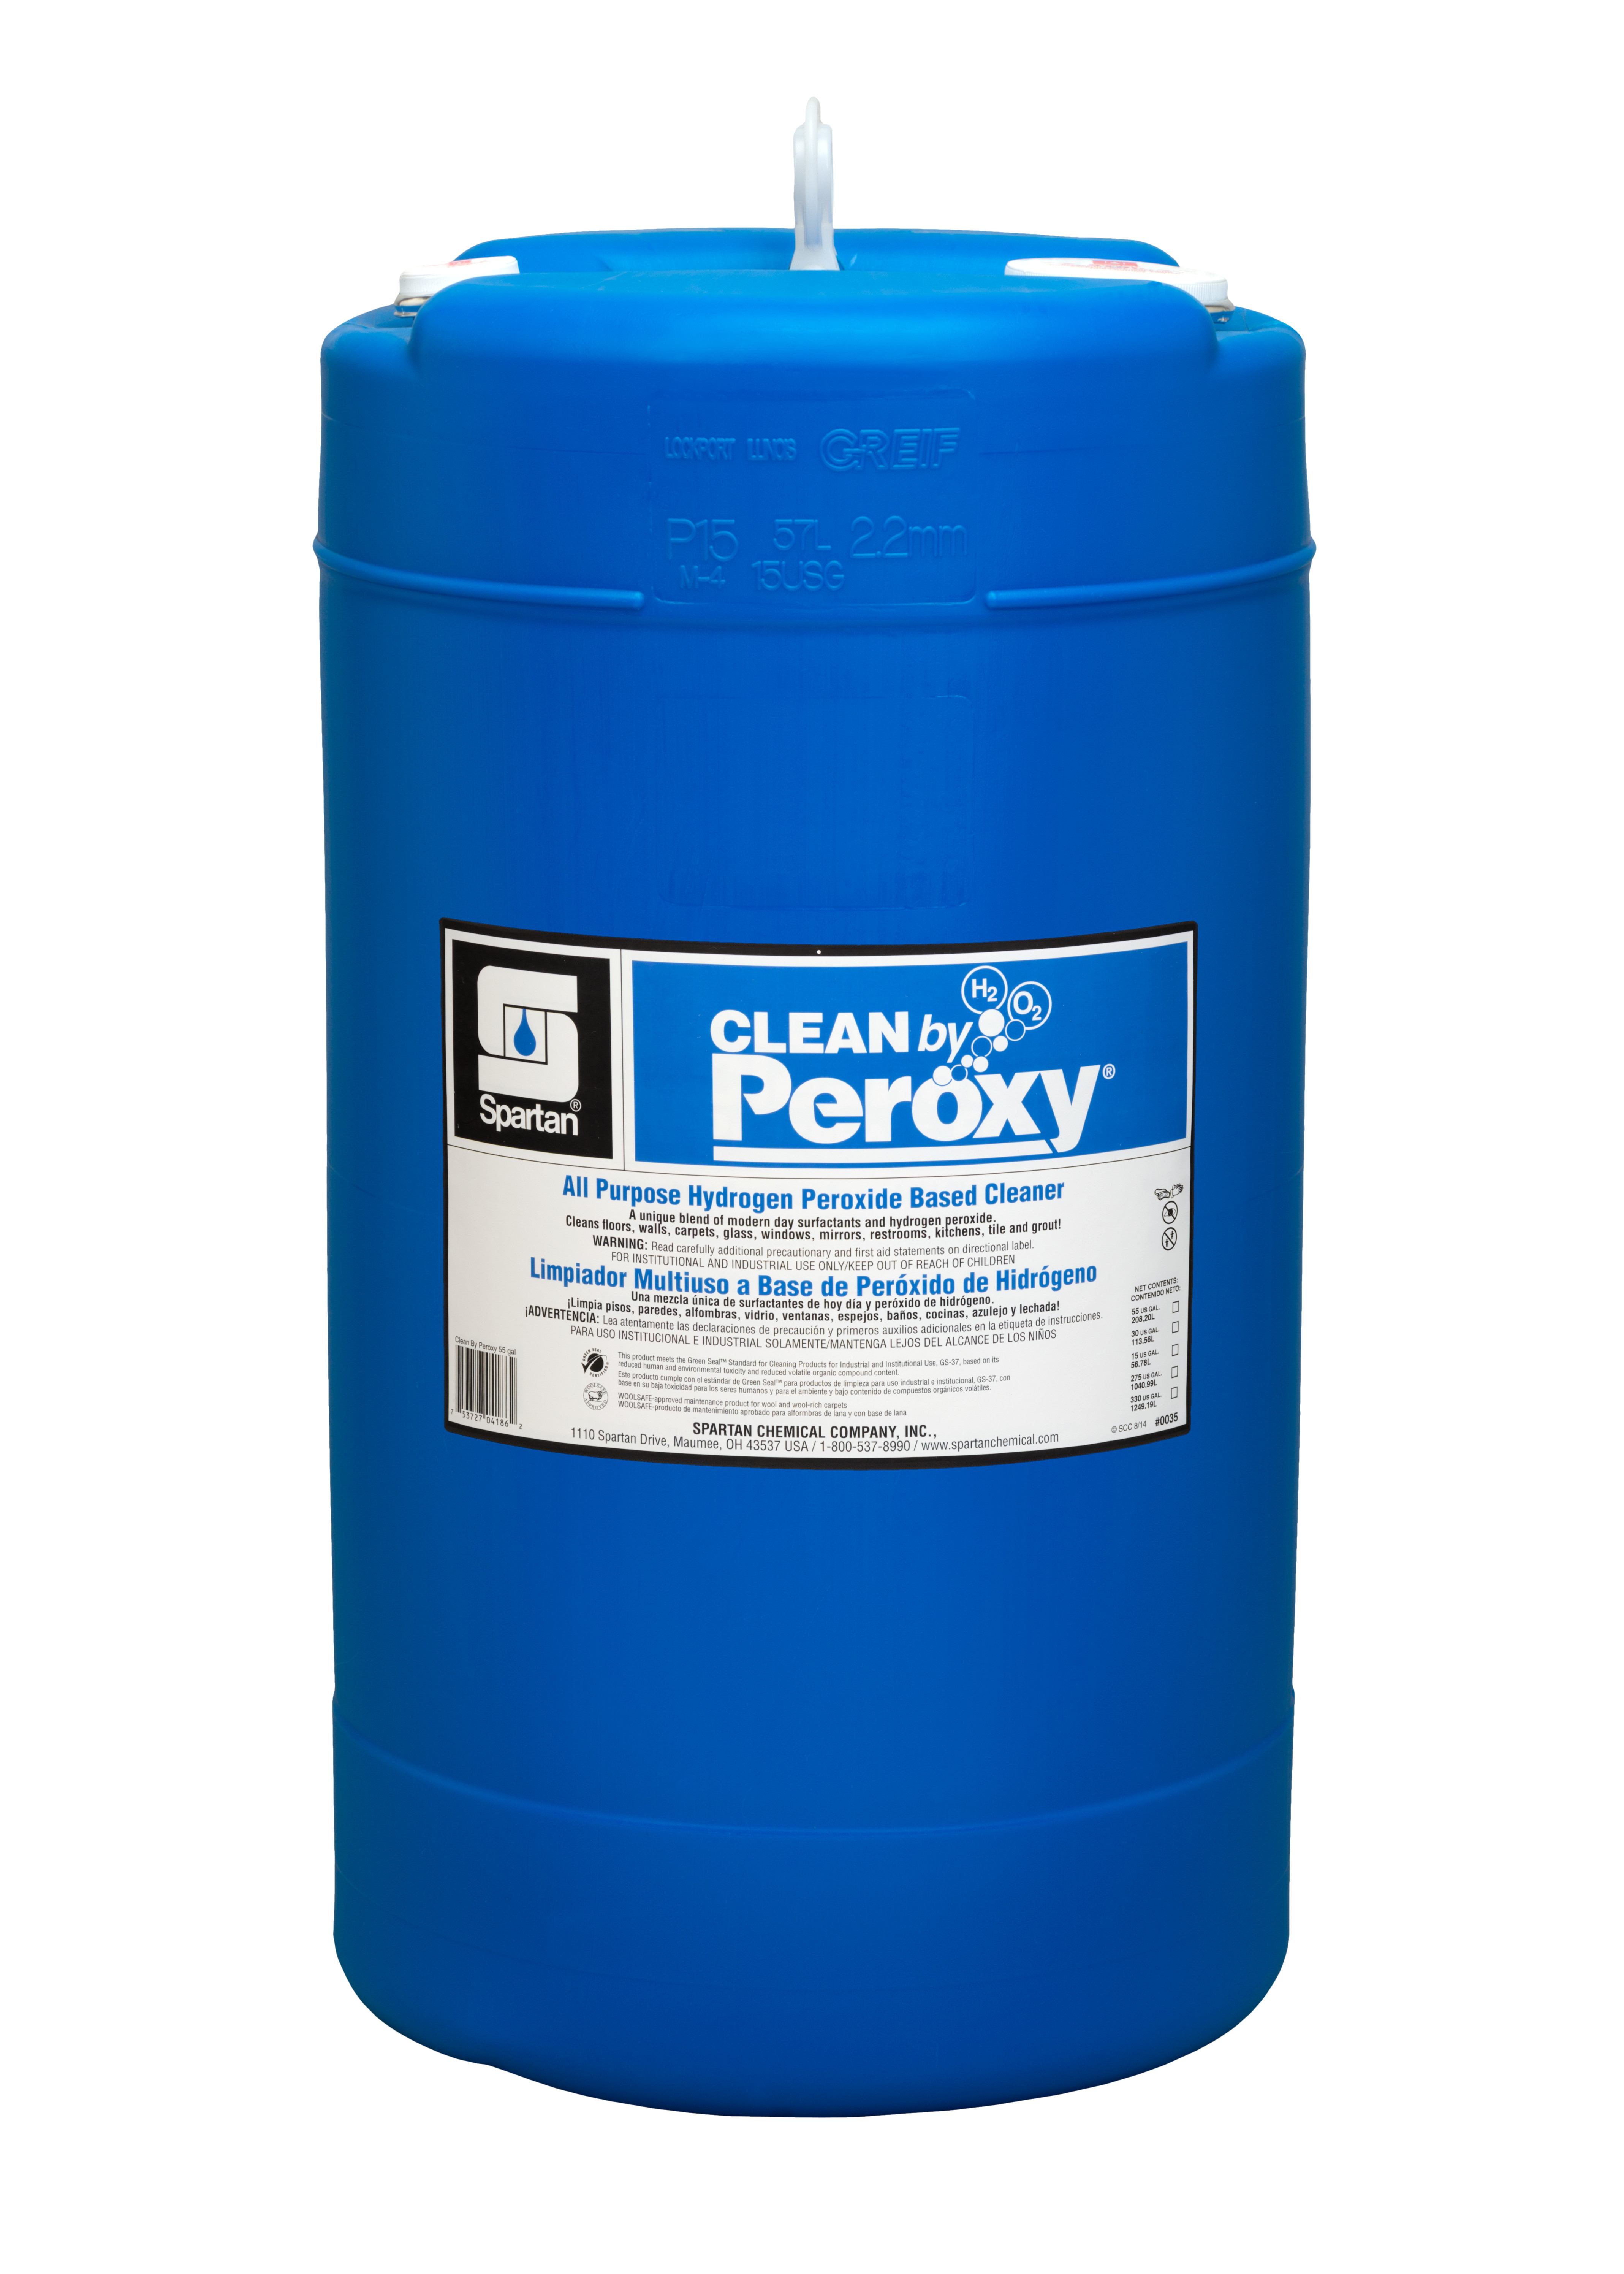 Spartan Chemical Company Clean by Peroxy, 15 GAL DRUM